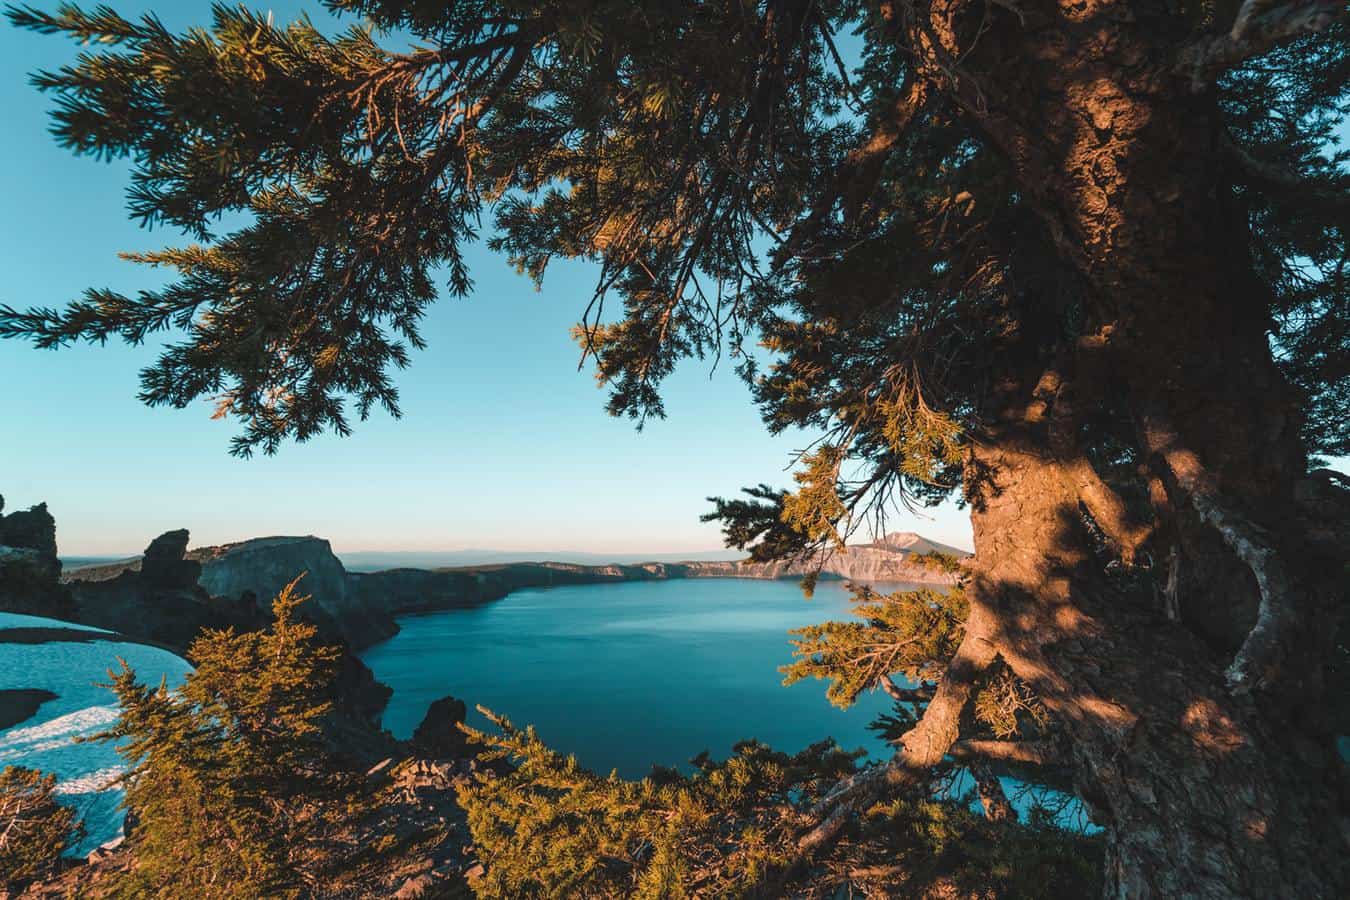 Tree overlooking lake with blue water in British Columbia.